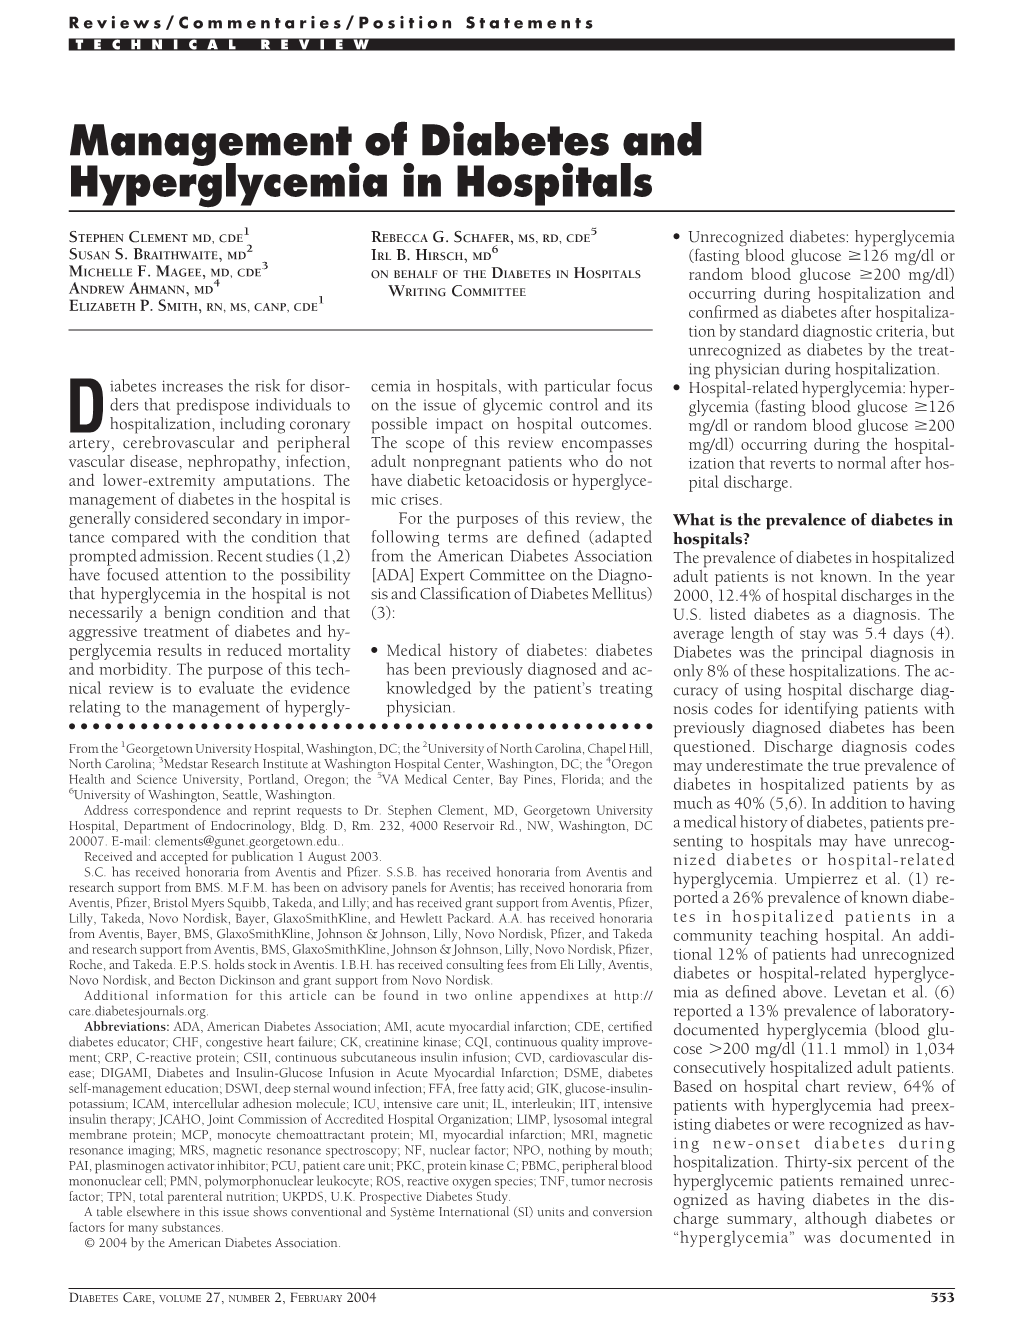 Management of Diabetes and Hyperglycemia in Hospitals